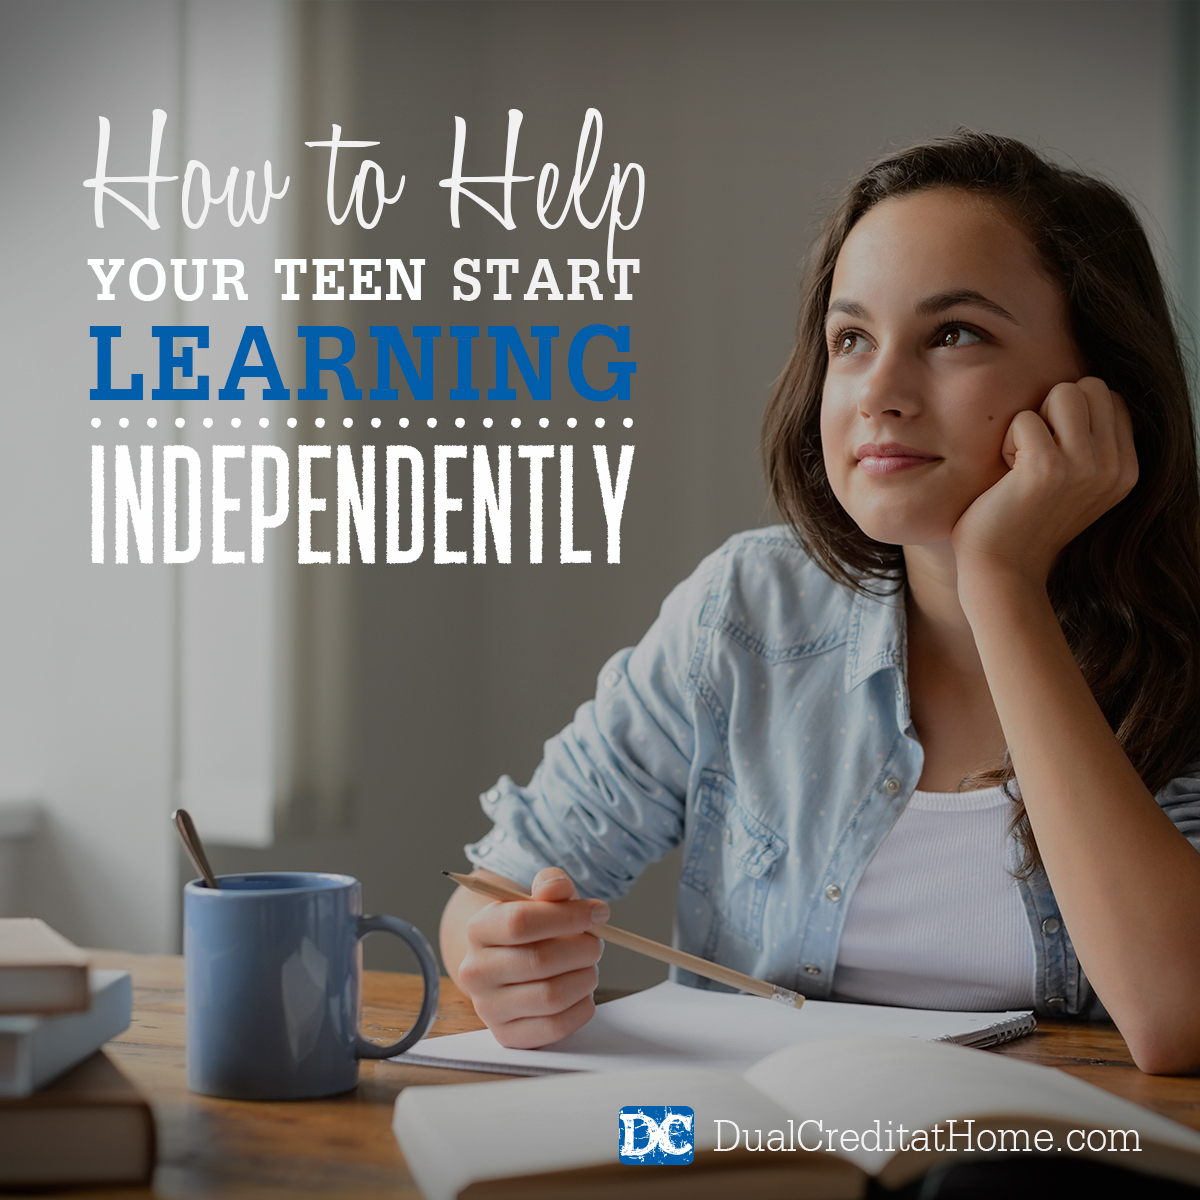 How to Help Your Teen Start Learning Independently